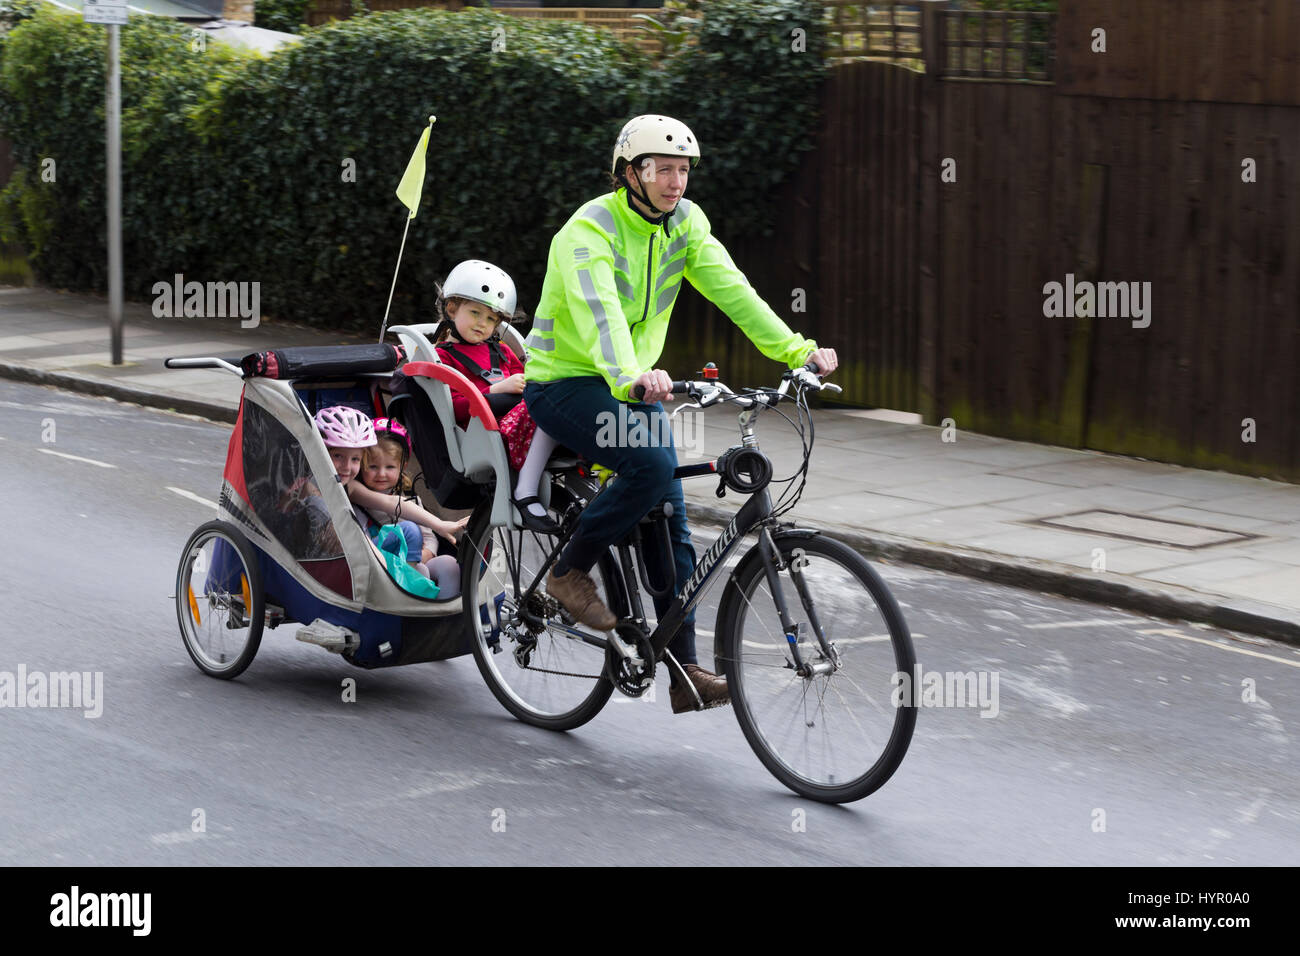 Woman cyclist on bike / bicycle with + 3 children; Co Pilot child seat with  helmet & towing cycle Chariot trailer with two / 2 kids with helmets. UK  Stock Photo - Alamy